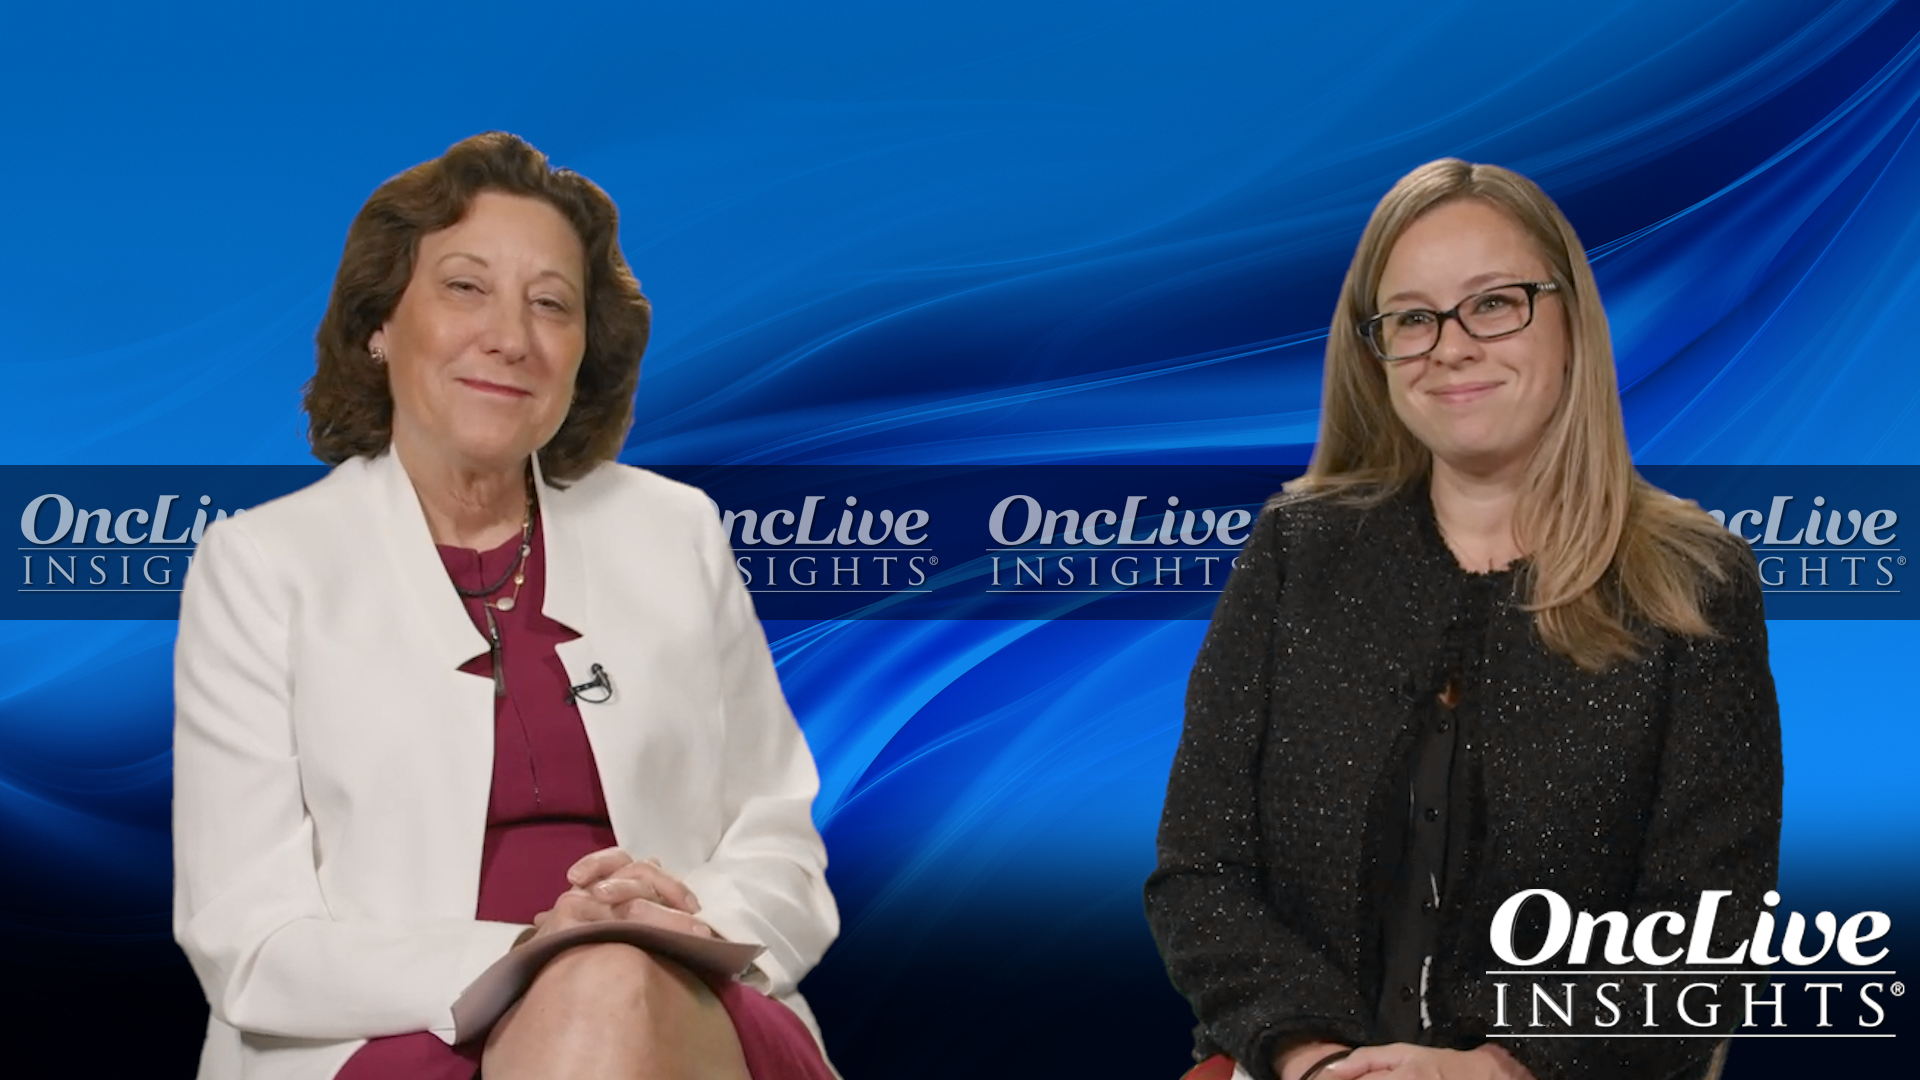 Video 1 - "HR+/HER2- Early-Stage Breast Cancer: Background and Risk Stratification "